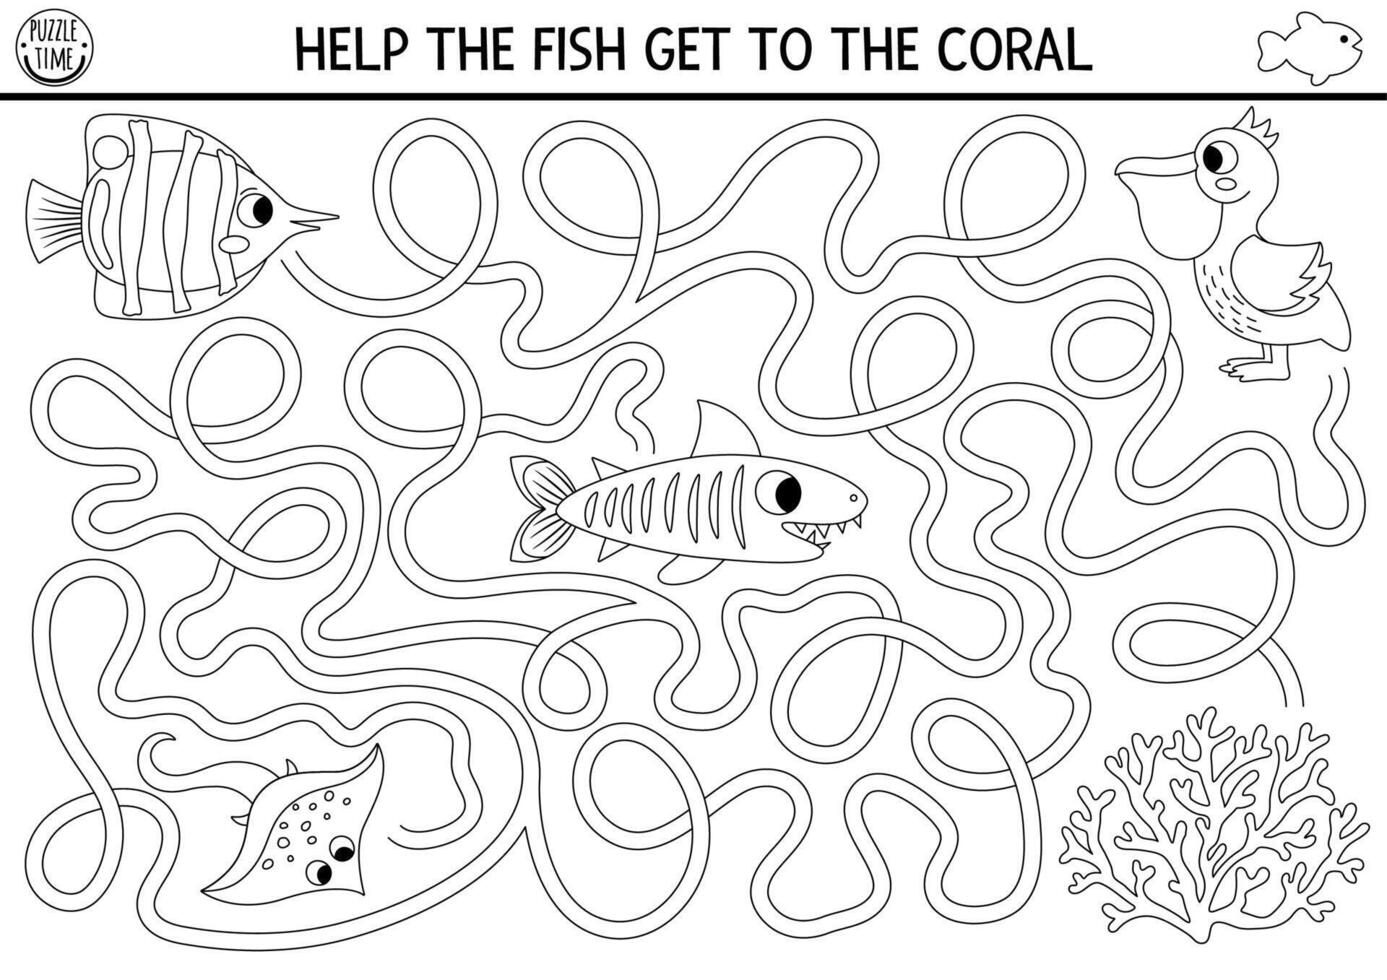 Under the sea black and white maze for kids with shark, pelican, coral, rayfish. Ocean line preschool printable activity. Water labyrinth gam, coloring page. Help the butterfly fish get to the coral vector